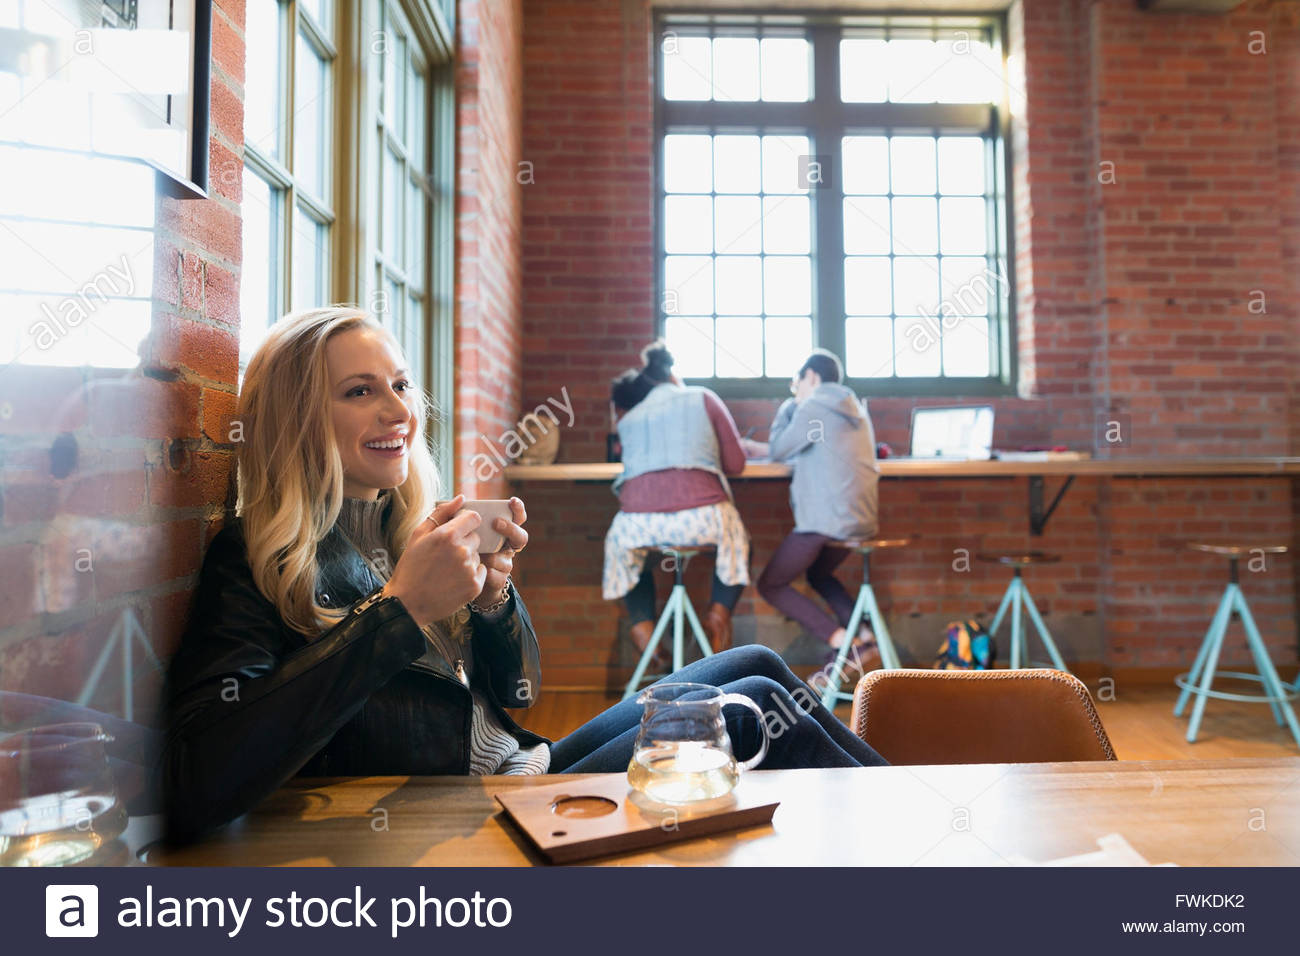 Smiling young woman drinking tea in coffee shop Stock Photo